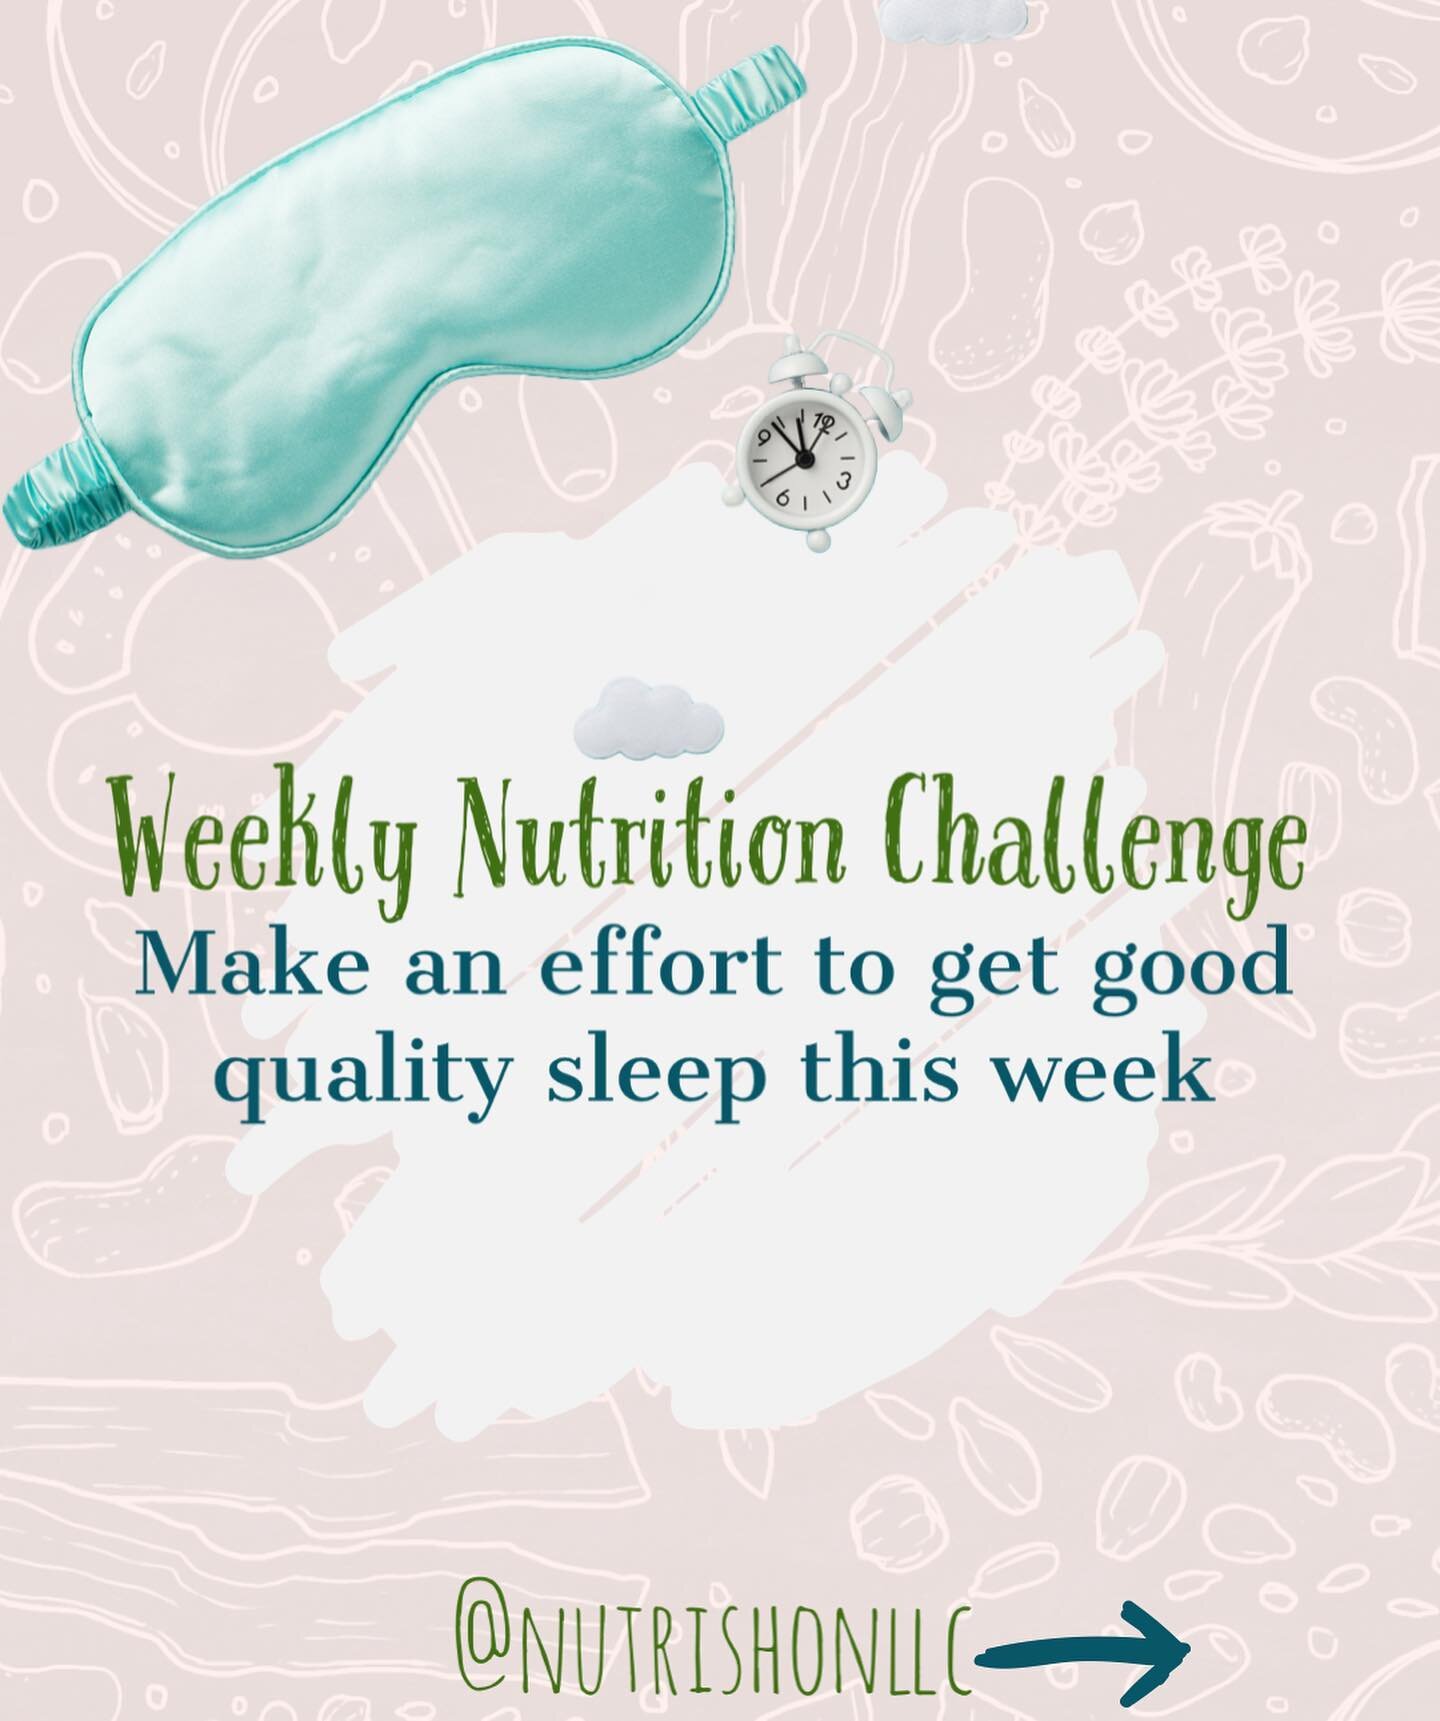 ❤️ this post to accept the challenge!

Sleep is VITAL to our wellbeing. We spend a third of our life sleeping. 1/3 of our life! And shouldn&rsquo;t we make the best of that time? After all, sleep effects: immunity, hunger and satiety, mental alertnes